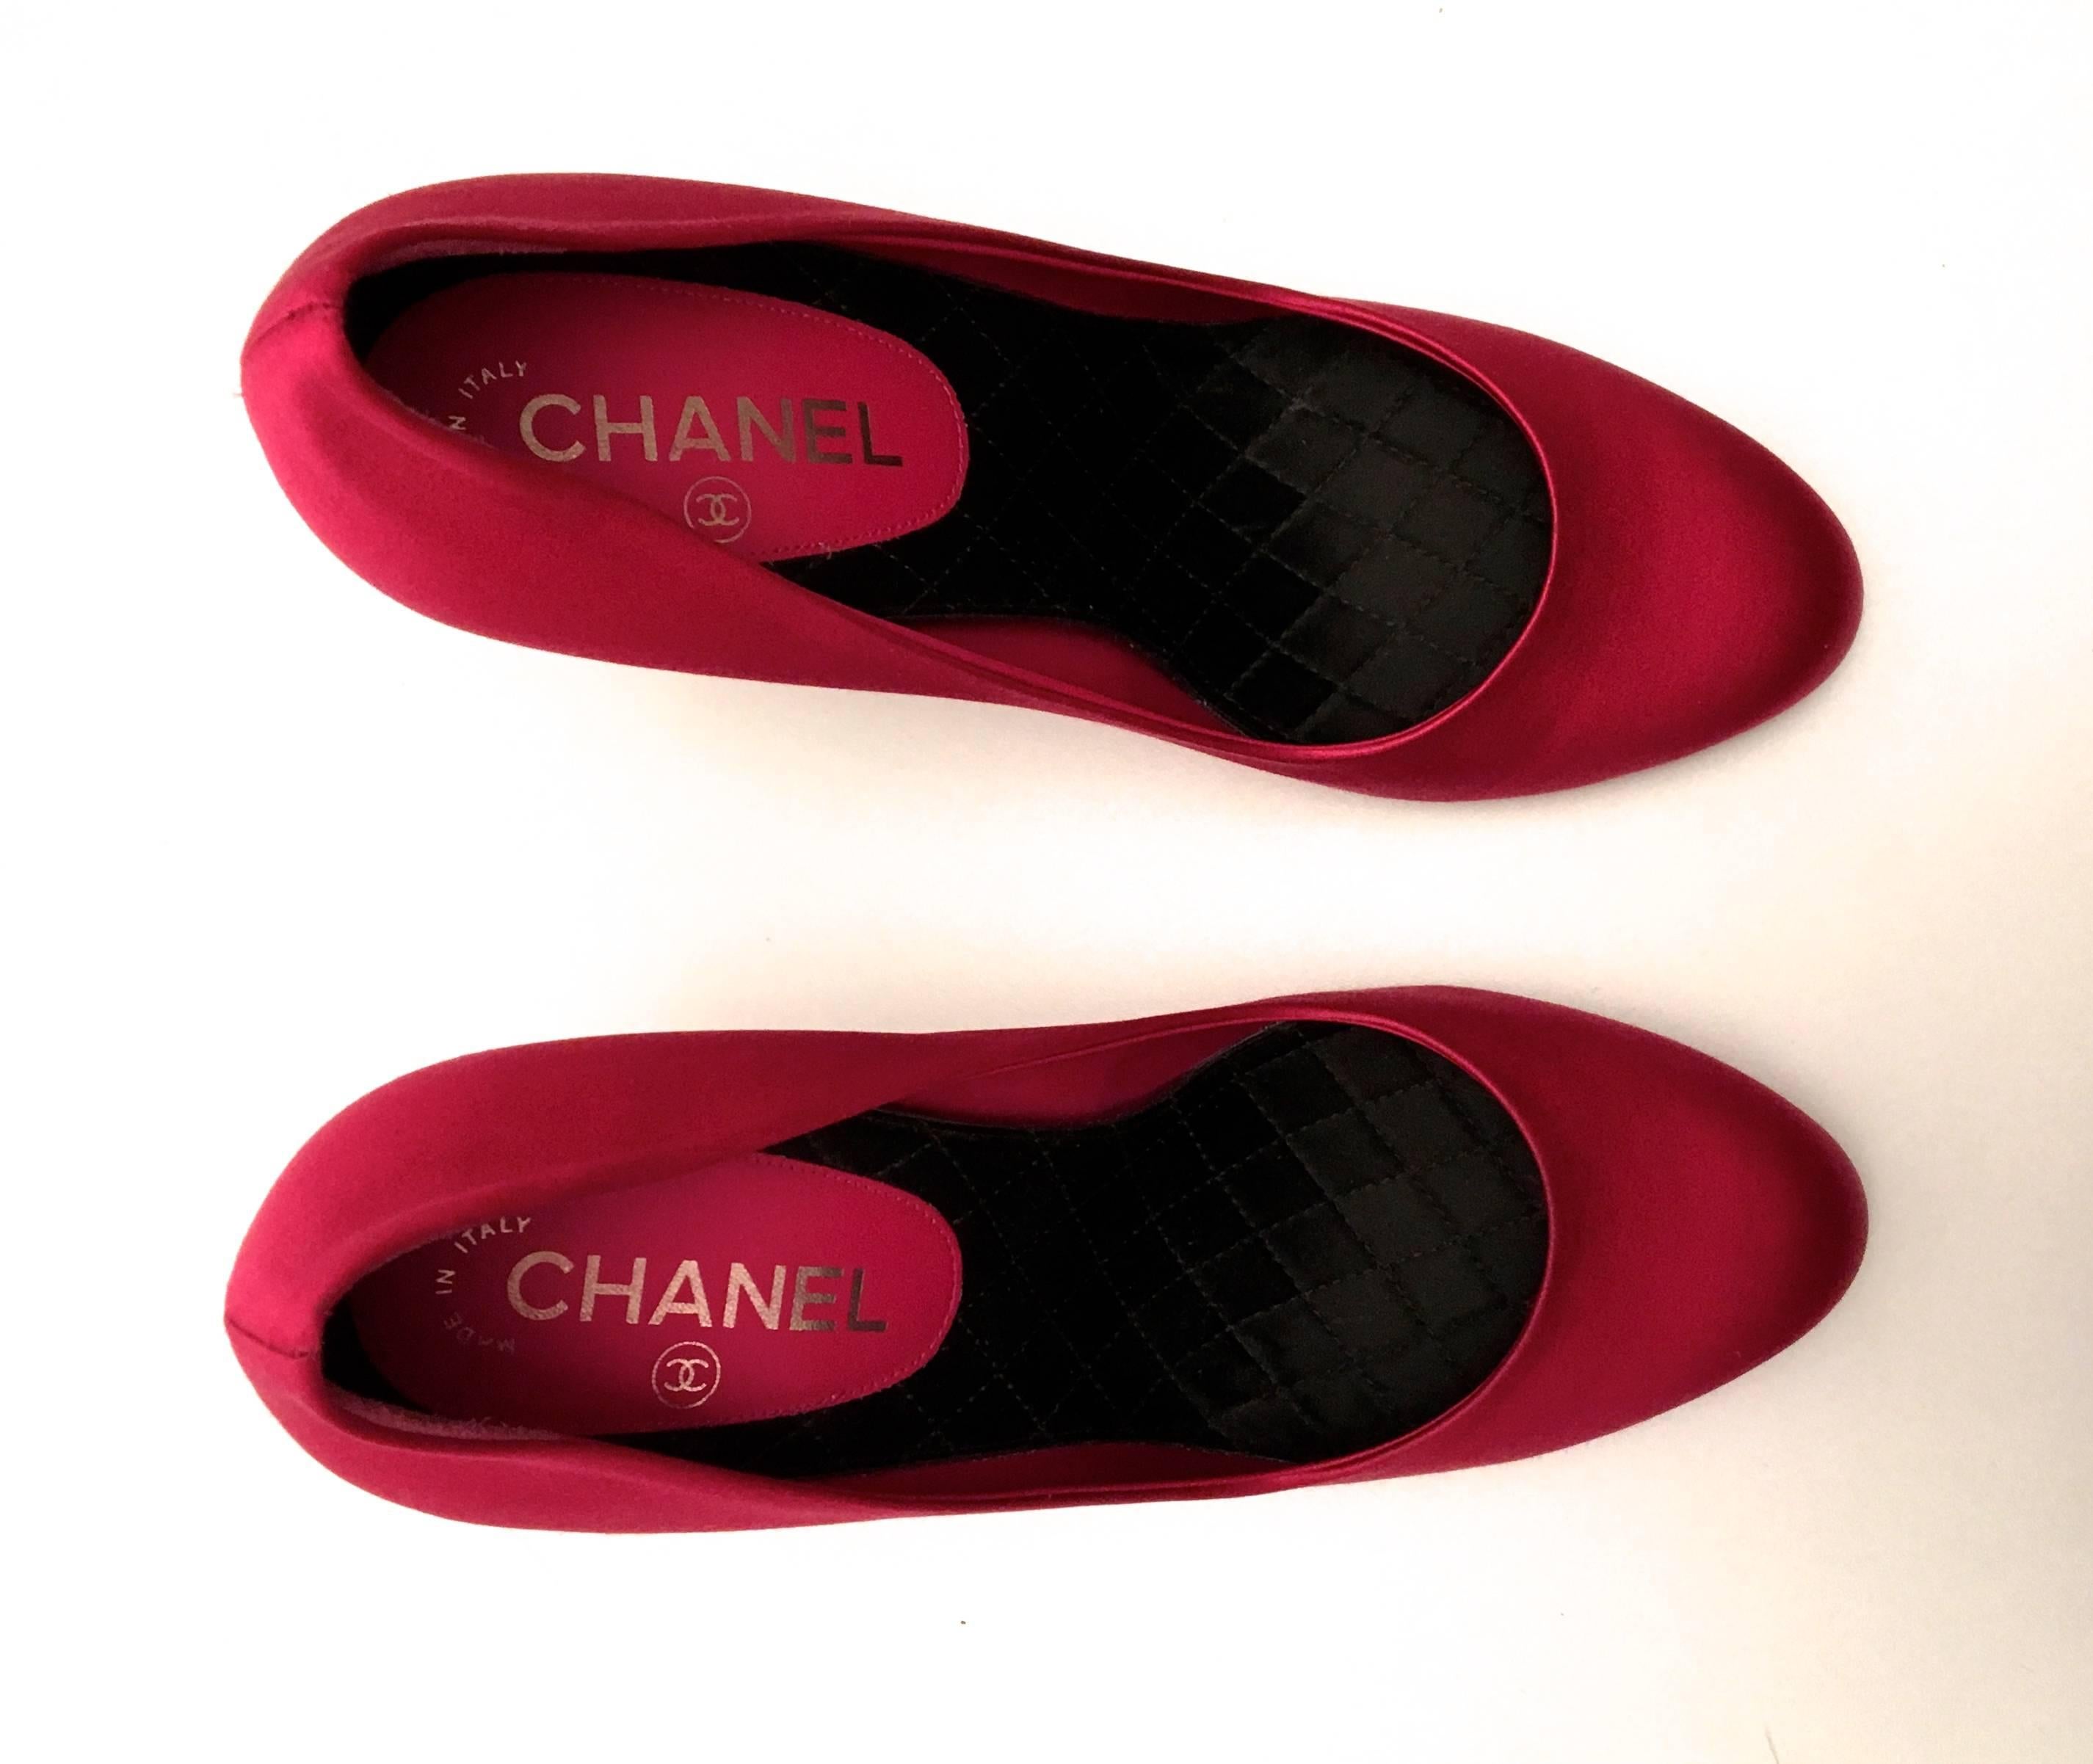 Presented here is a gorgeous new pair of Chanel saint high heeled dress shoes. The shoes are covered with a gorgeous magenta satin. The shoes are size 41. The heel height is 4.5 inches from the back of the shoe. There is a double CC emblem on the